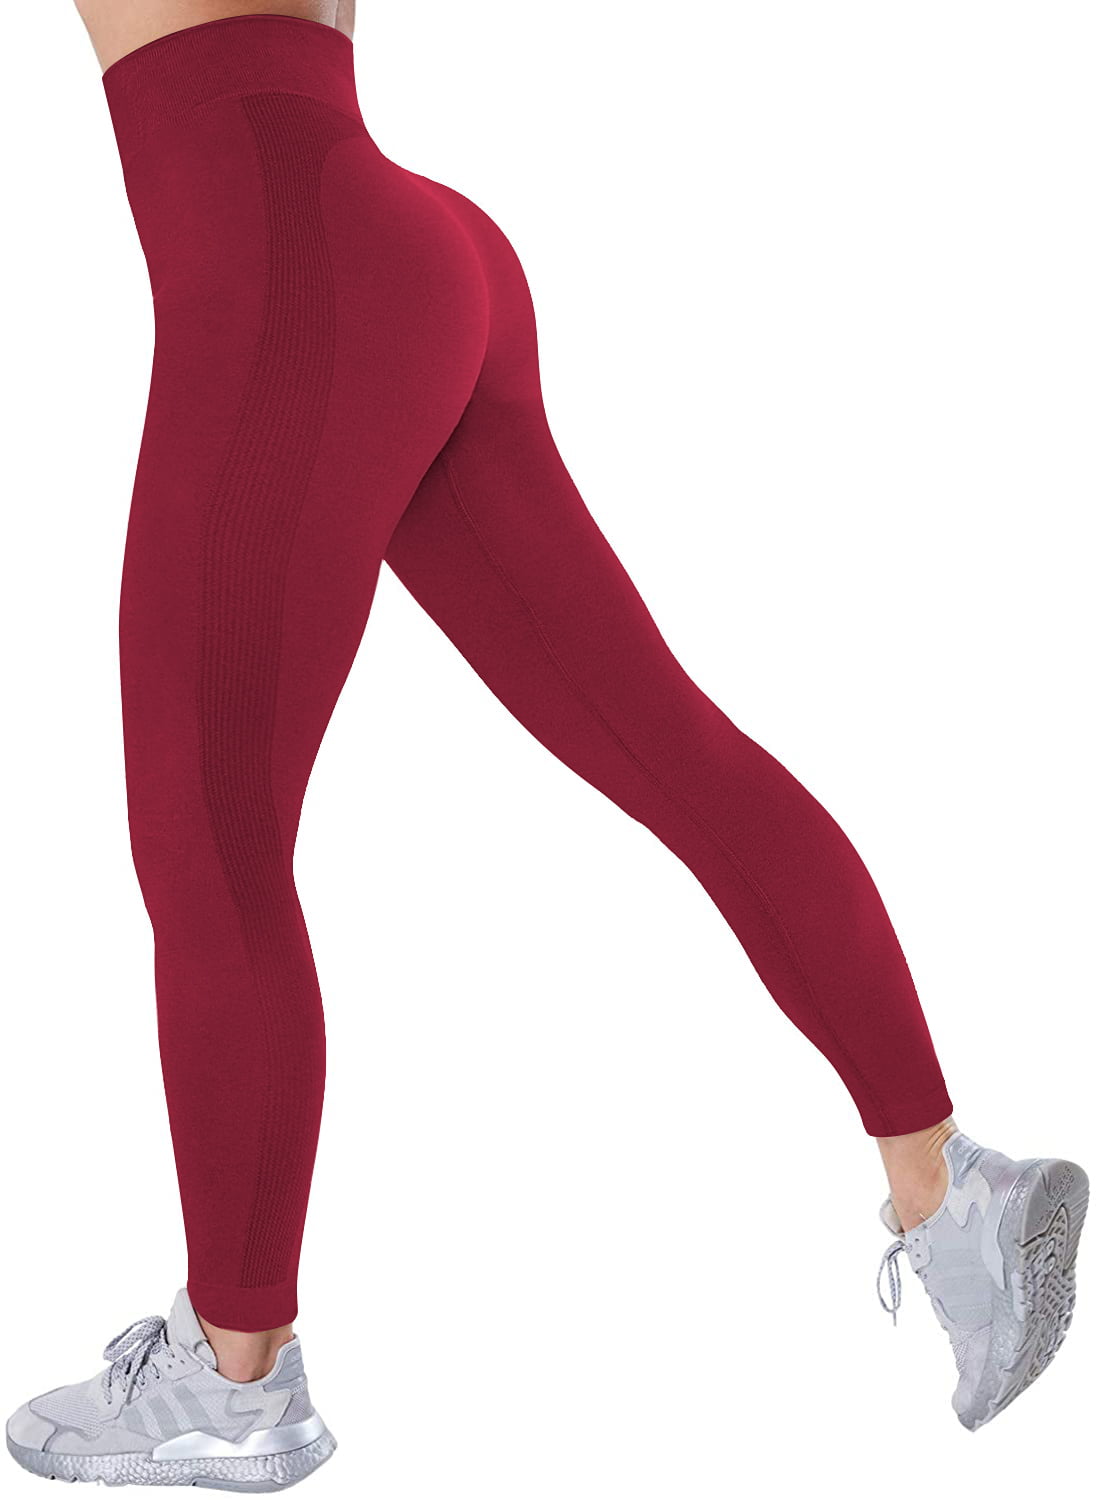 Squat proof leggings- Shop for products with free shopping